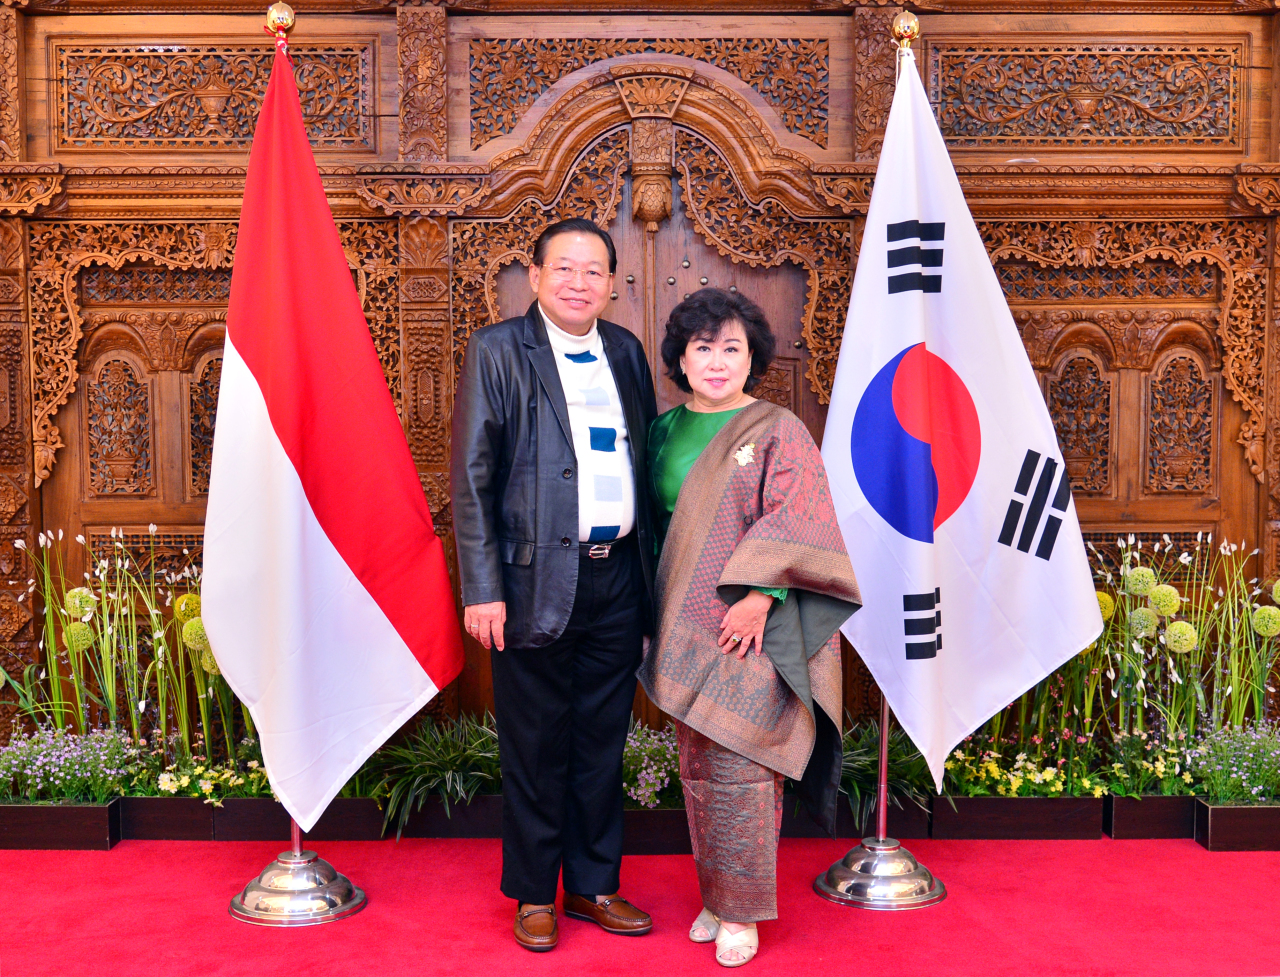 From Left: Ambassador Gandi Sulistiyanto Soeherman and Madam Susi Ardhani Sulistiyanto. Madam Sulistiyanto dressed impeccably in traditional Indonesian baju kurung and Songket (golden thread hand-woven) originated from Palembang, South Sumatera province for first public appearance as spouse of Indonesian Ambassador to Korea. (Park Hyun-Koo/The Korea Herald)